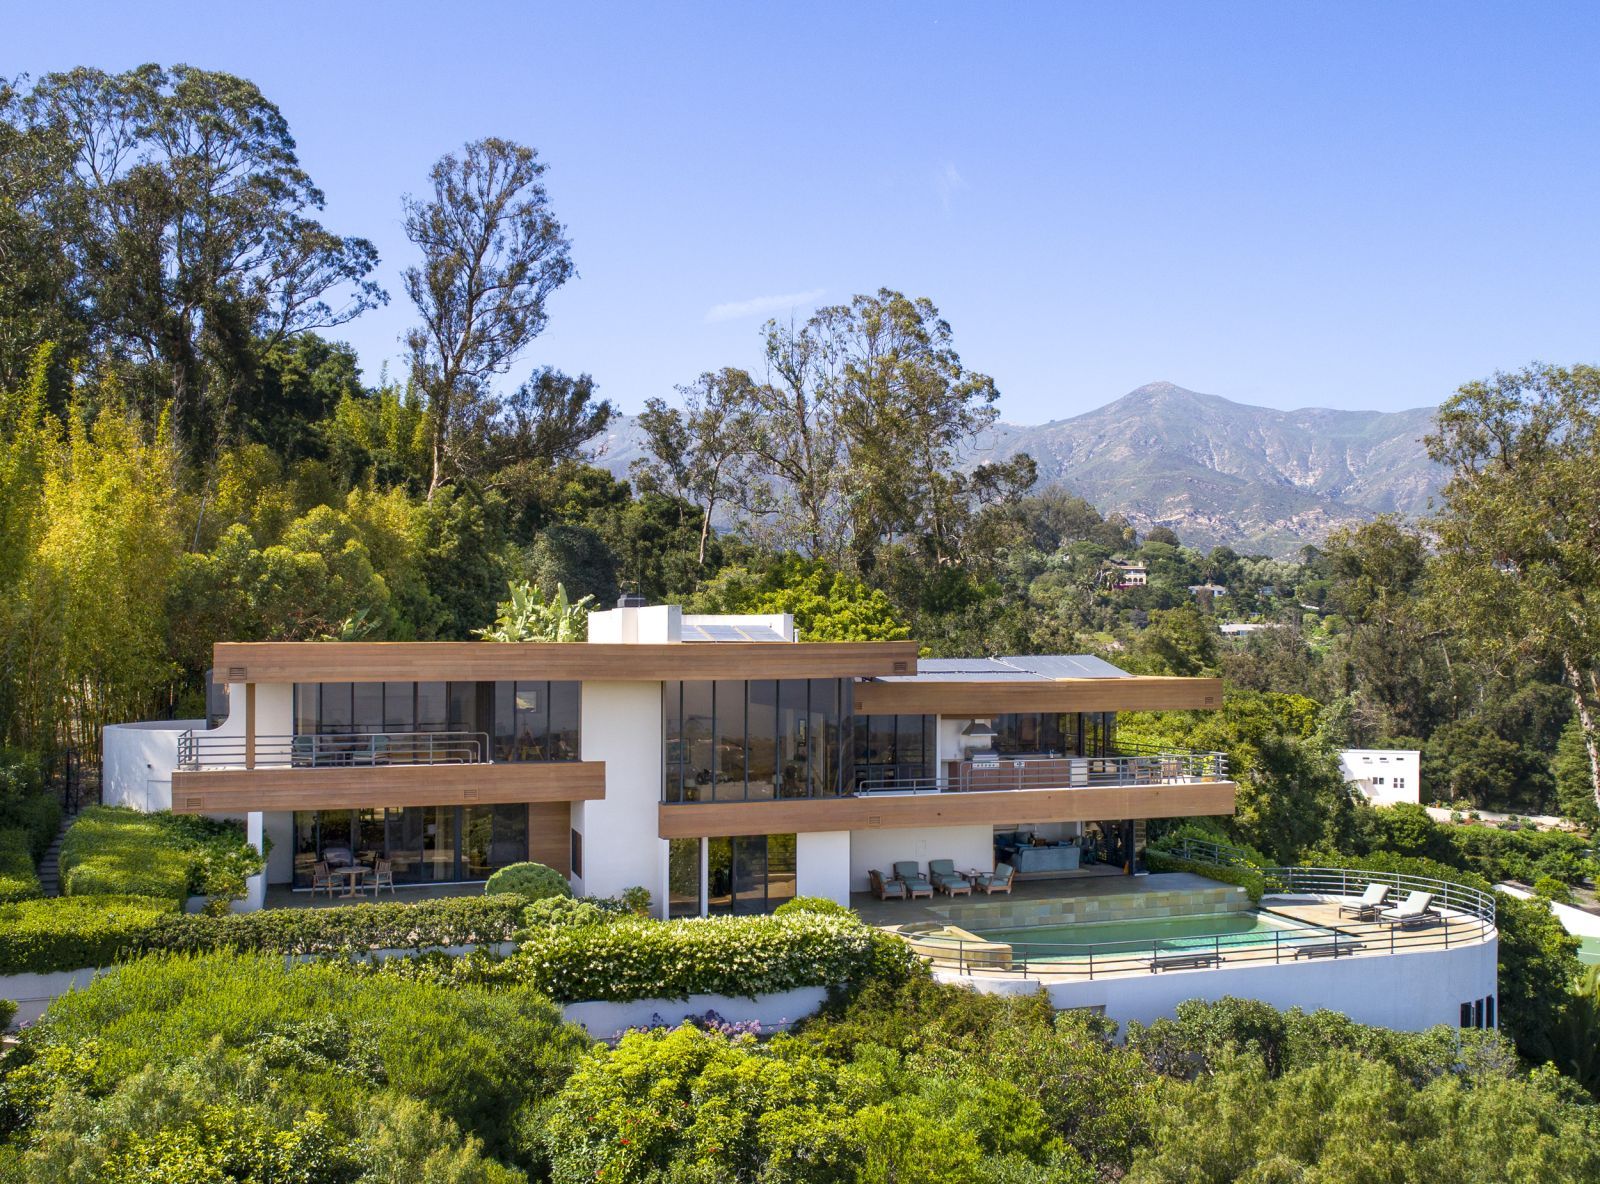 A birds eye view of an architecturally remarkable glass and wood contemporary home in Montecito